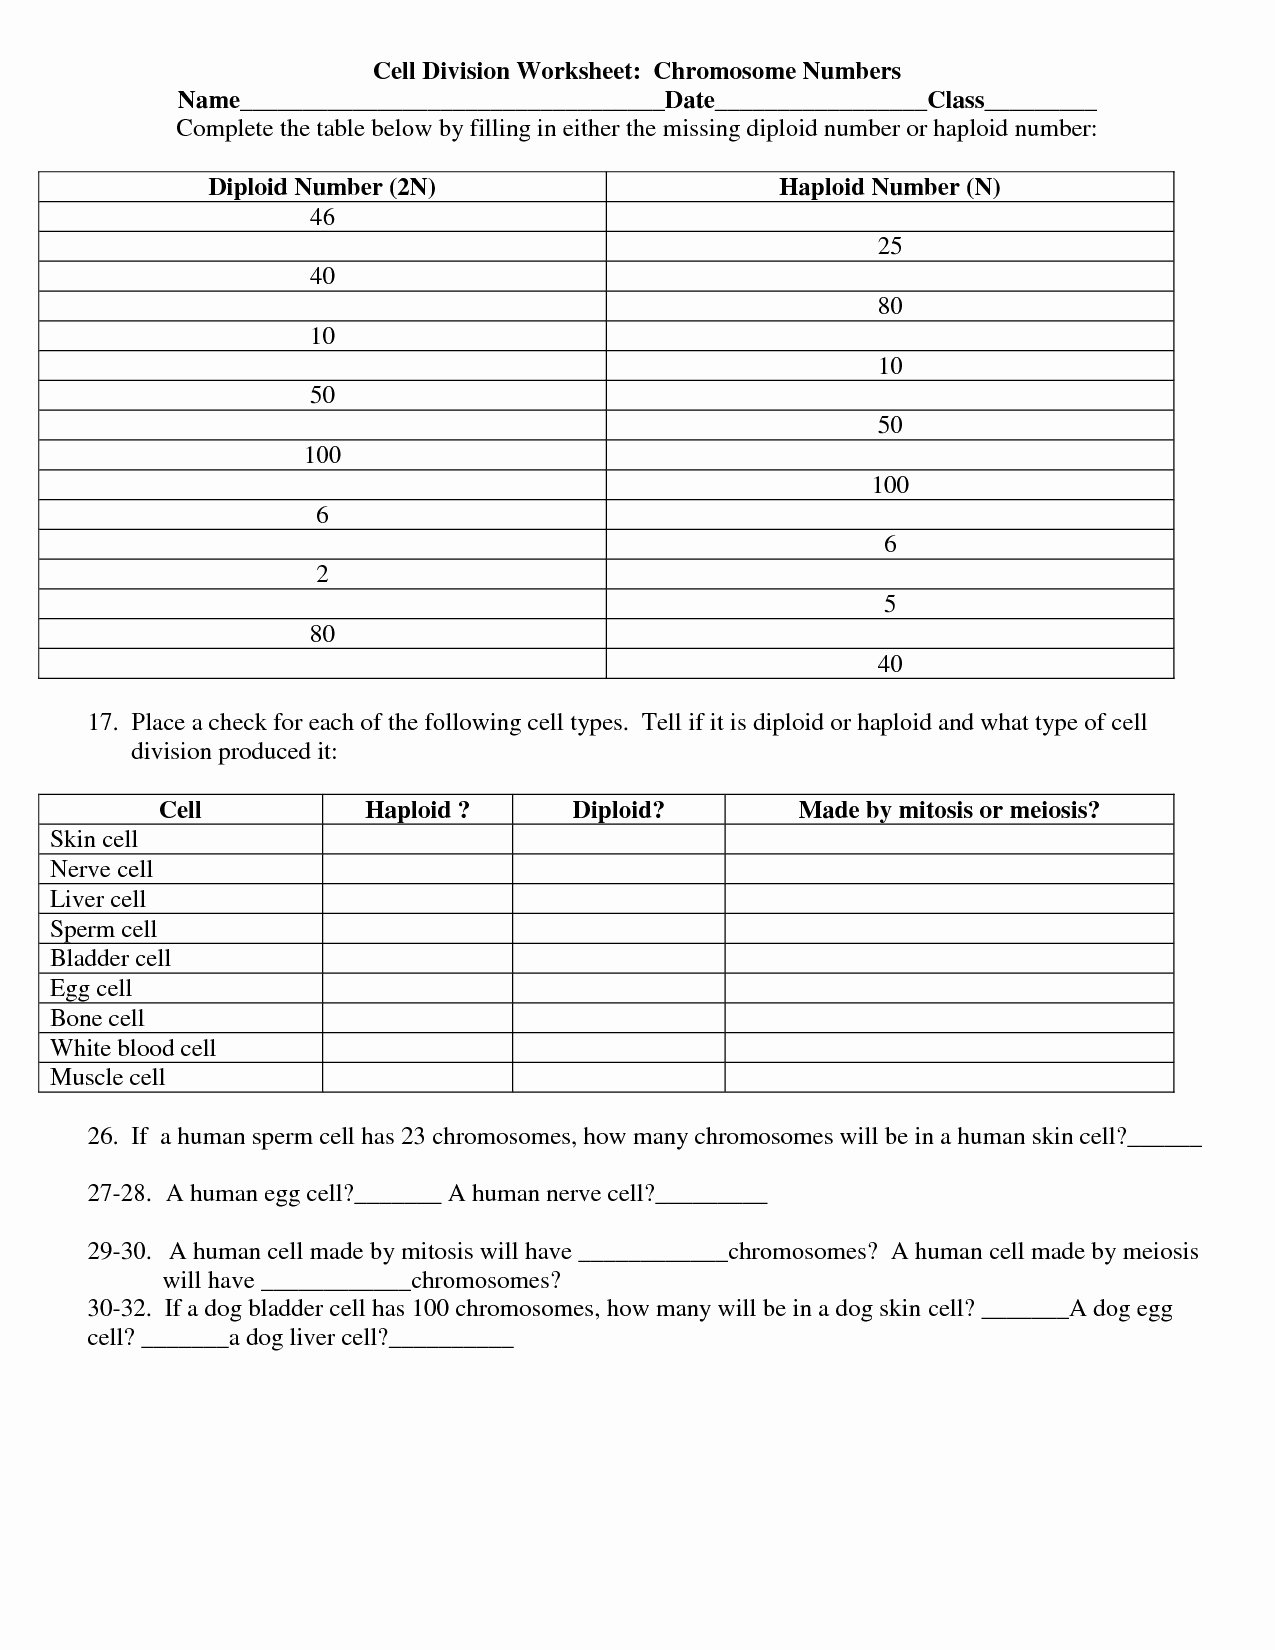 Cell Division Worksheet Answers Lovely 12 Best Of Cell Division Worksheet Mitosis Notes